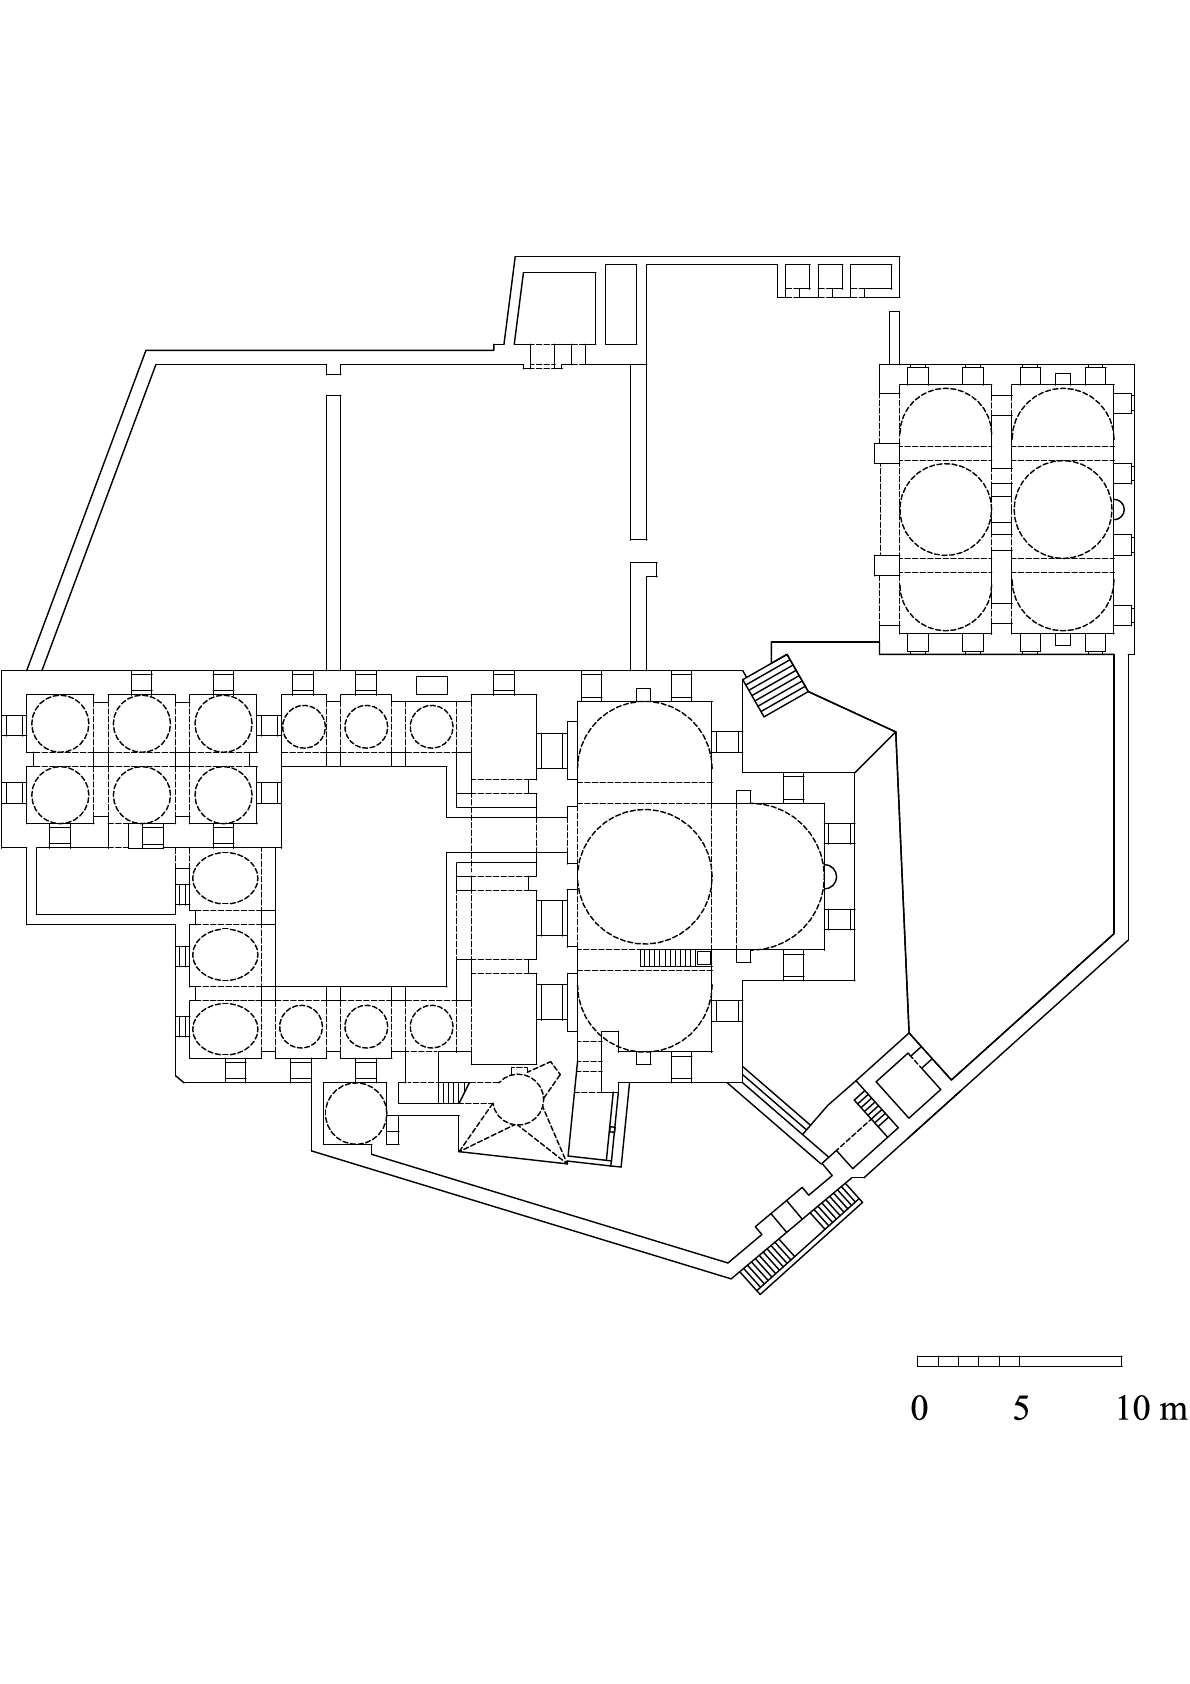 Floor plan of Suleyman Pasha Mosque at the Cairo Citadel